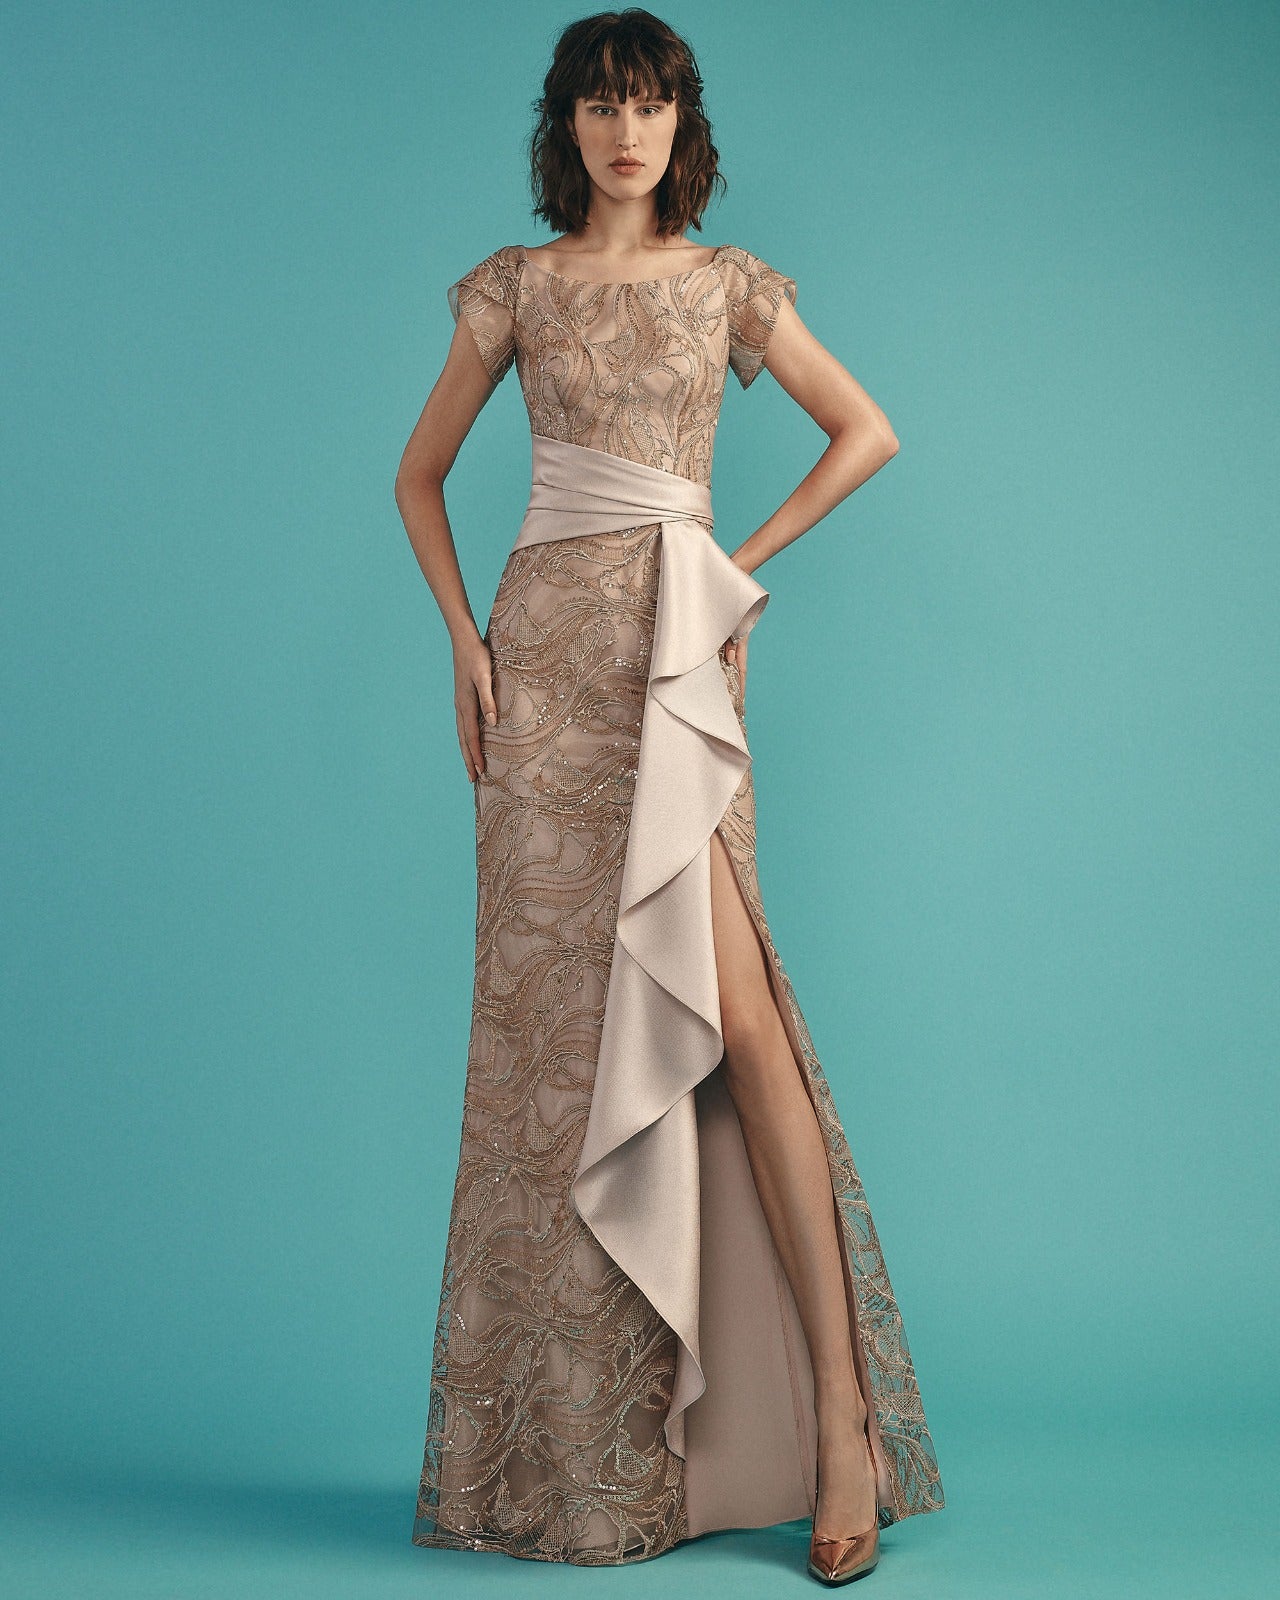 Gemy Maalouf BC1485 hazelnut sequin dress with ruffled details and a daring slit